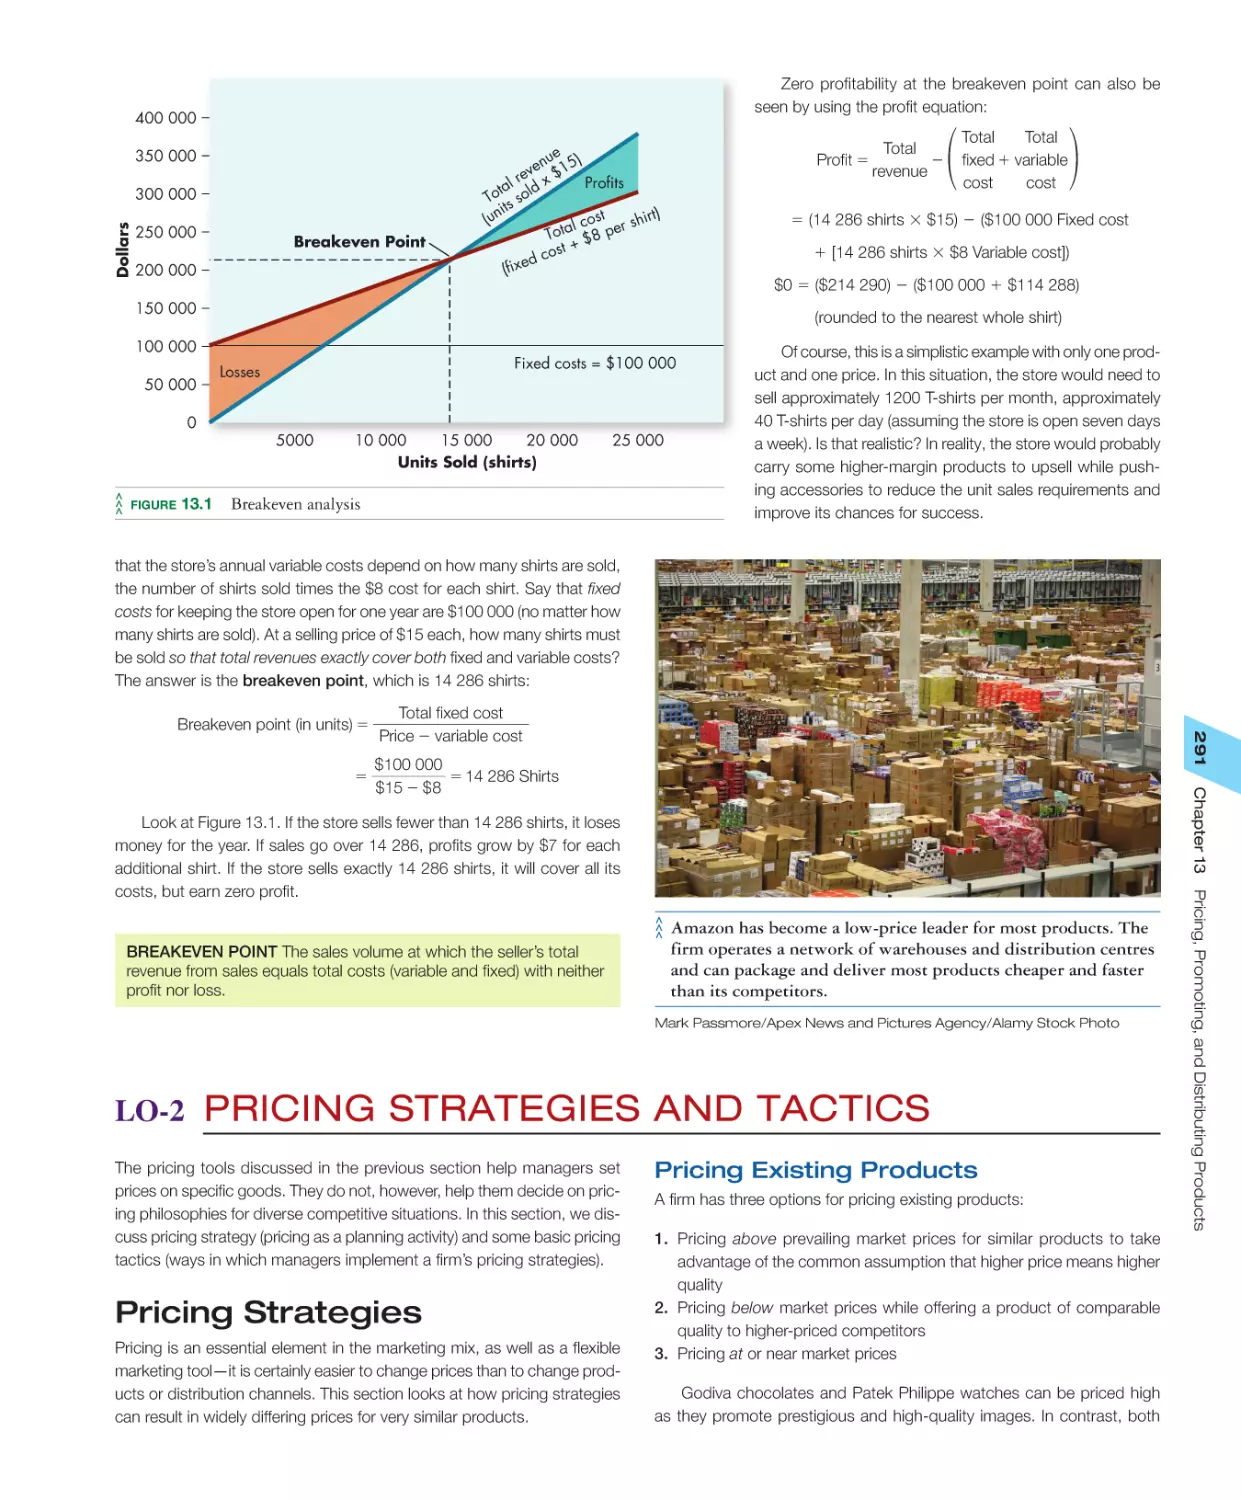 LO‐2 Pricing Strategies and Tactics